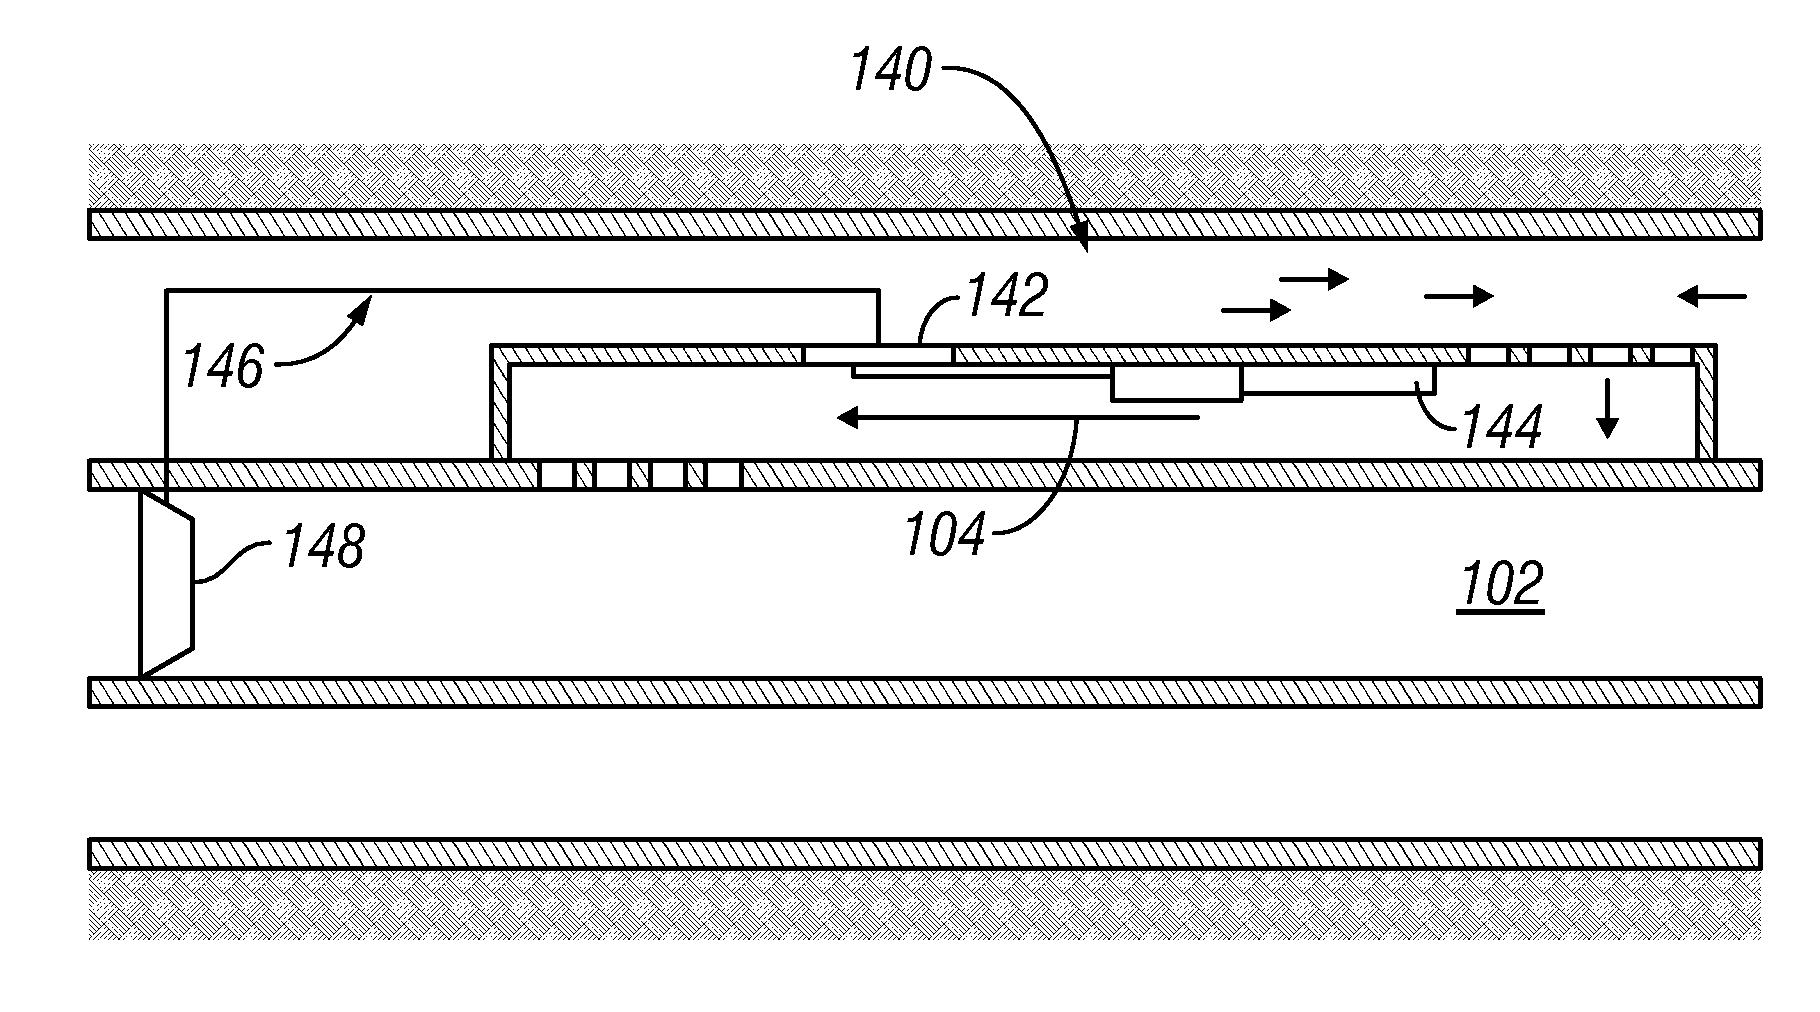 Water Sensing Adaptable Inflow Control Device Using a Powered System